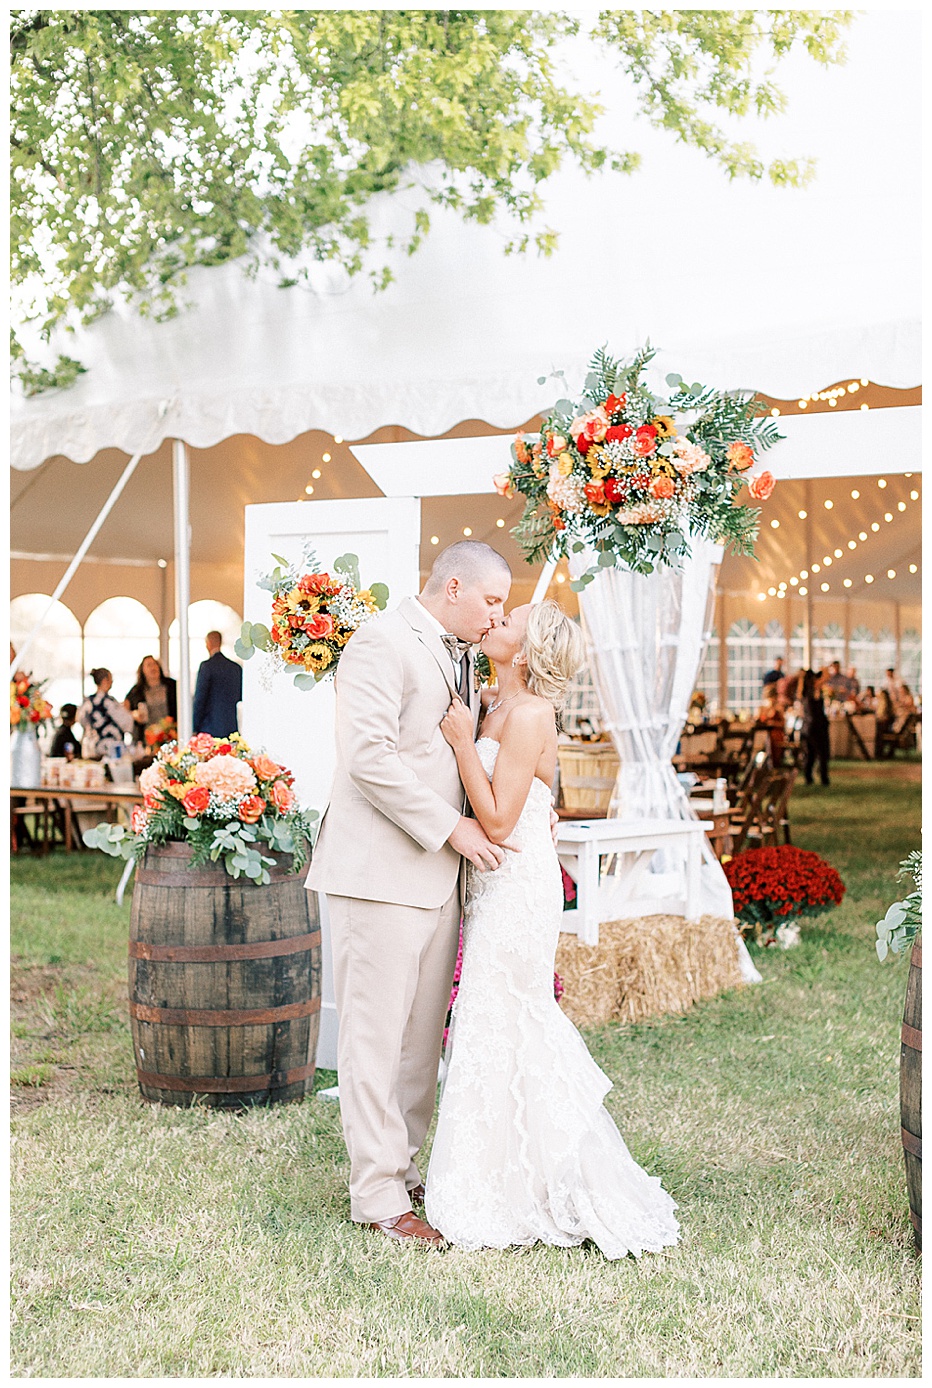 A Charming Autumn Bayfront Wedding in Maryland by Washington, DC and Florida Keys Wedding Photographer || Lizzy Morrison of LB Photography